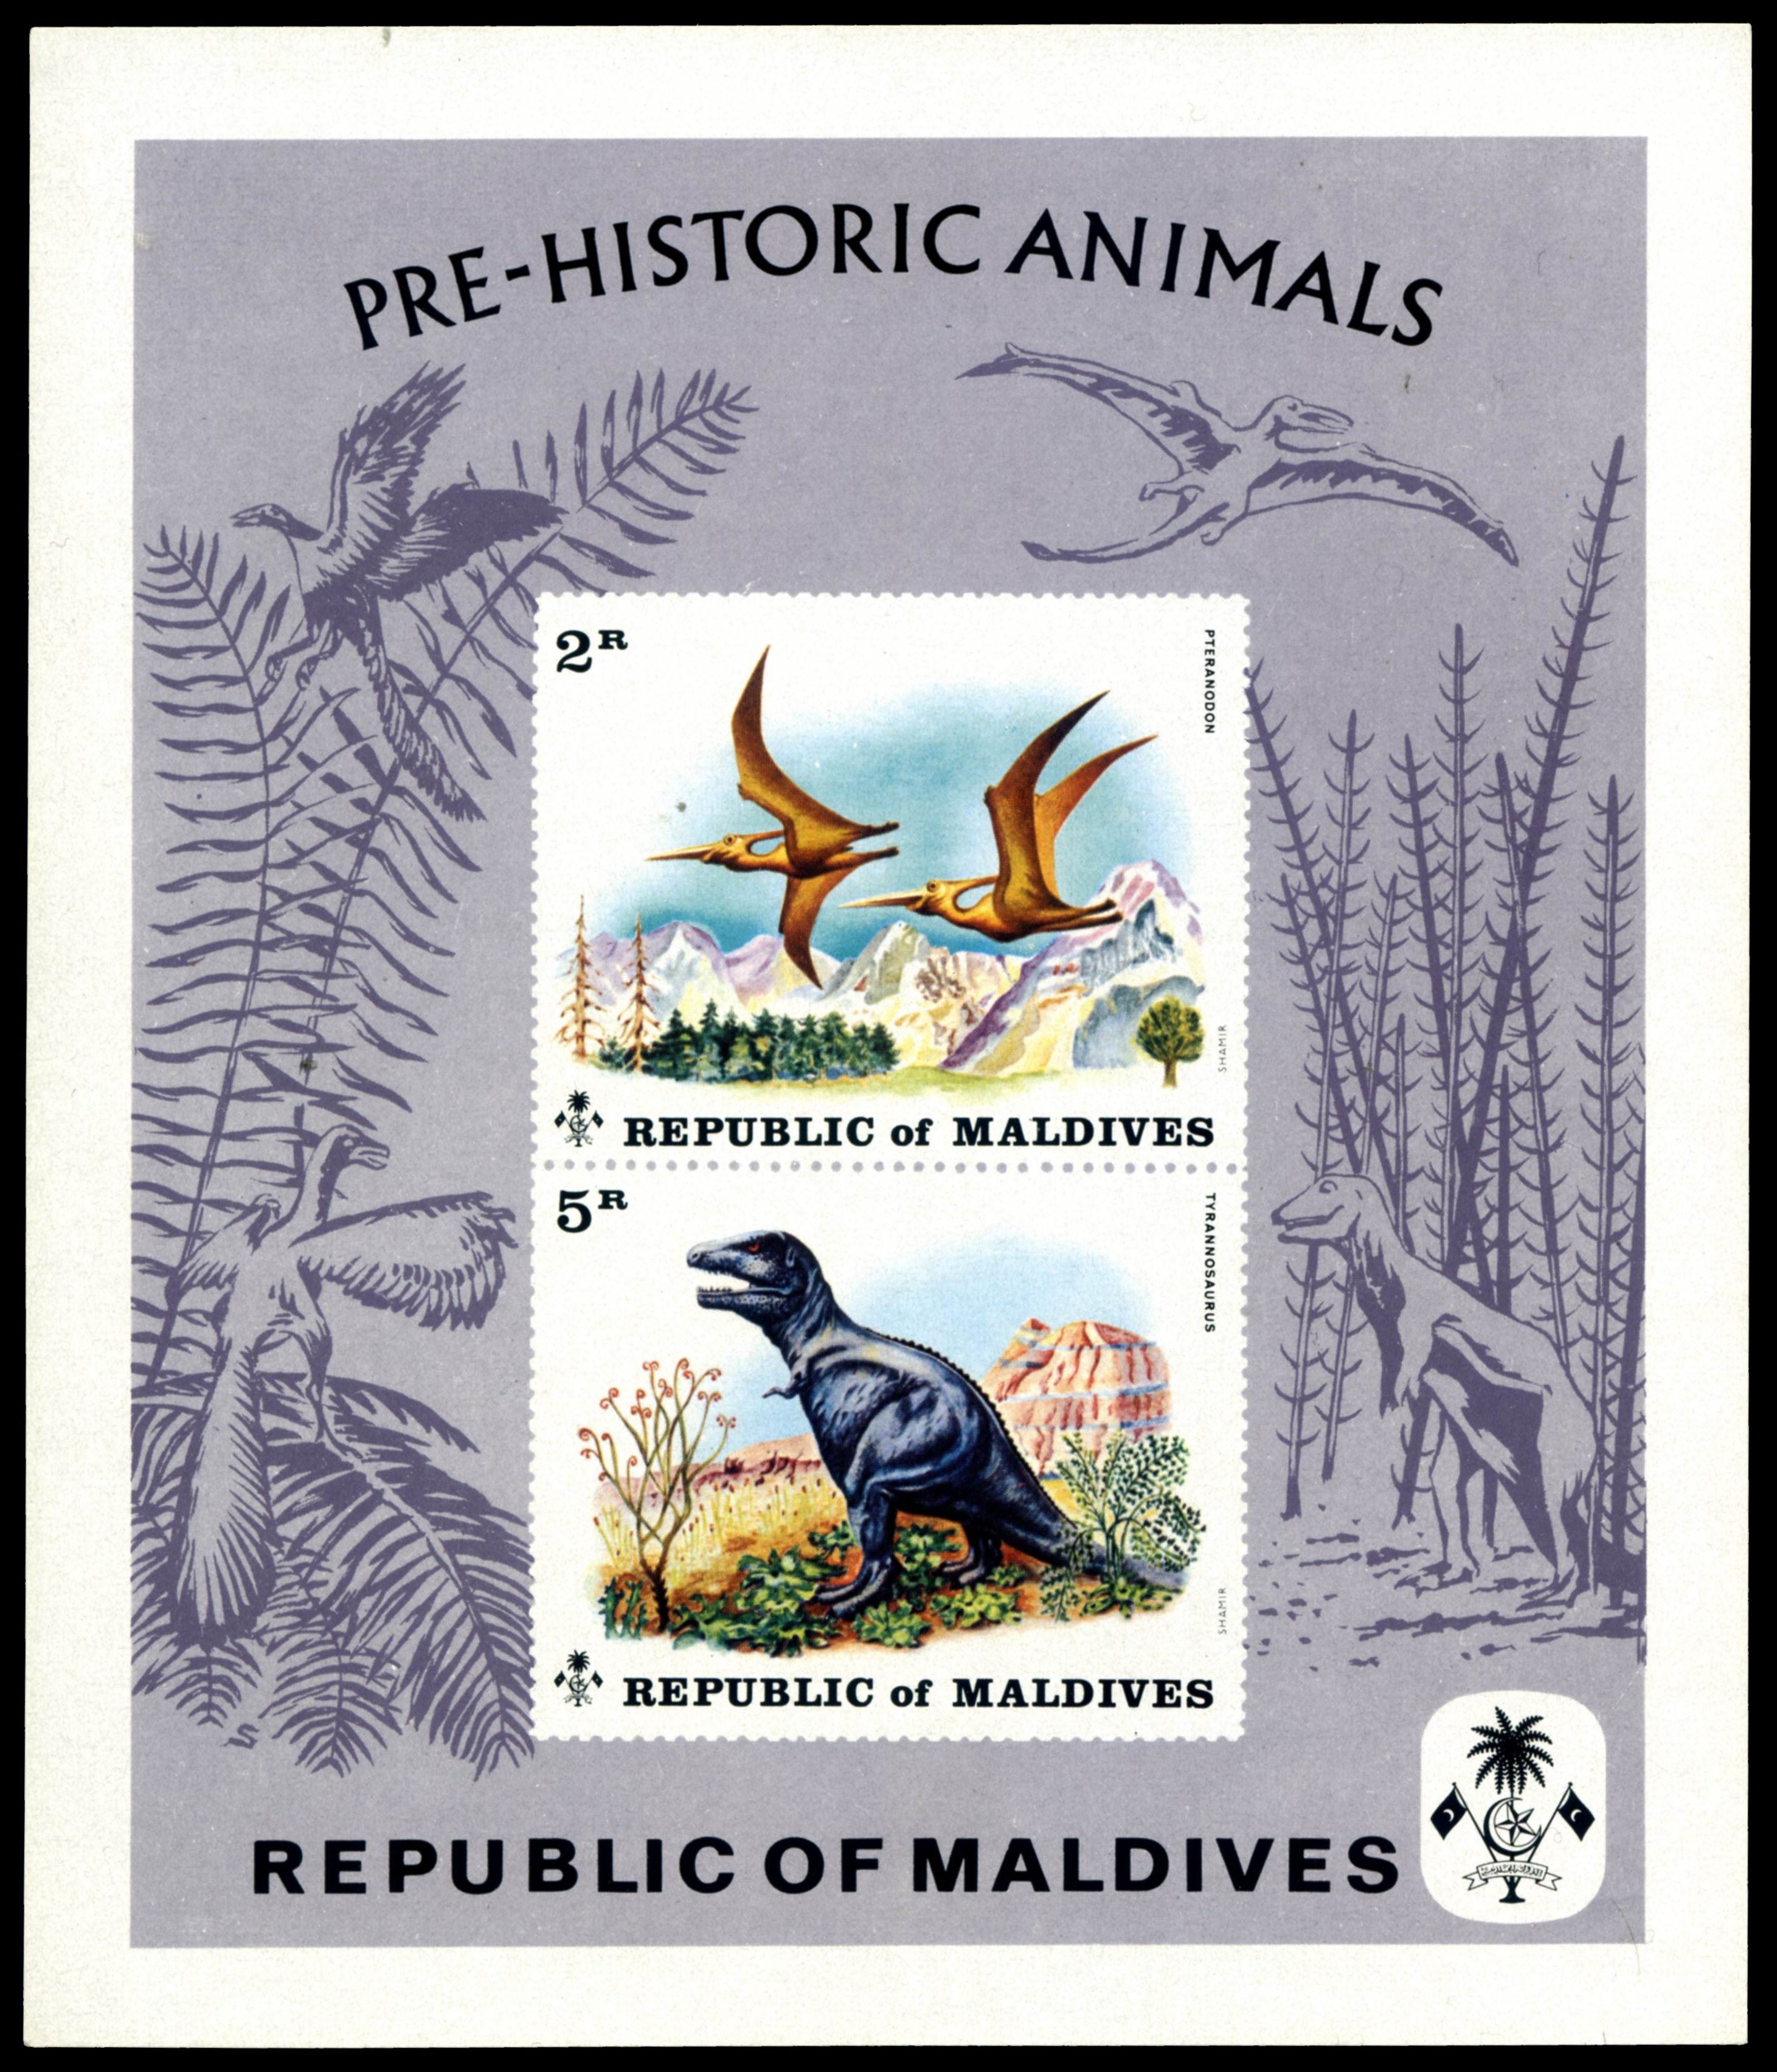 Prehistoric animals on promotional card of Maldives